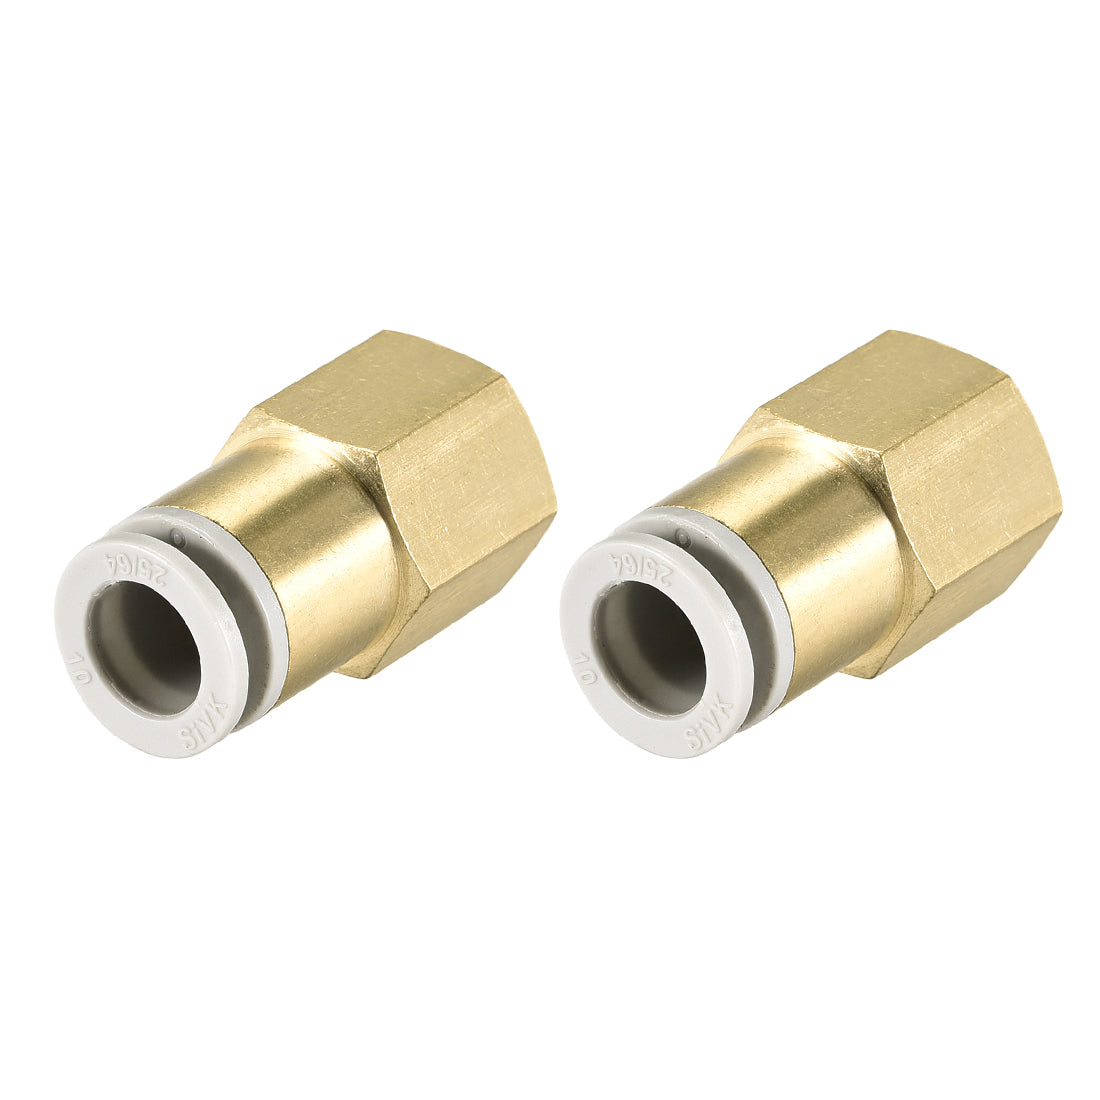 uxcell Uxcell Push to Connect Tube Fittings 10mm Tube OD x 3/8 PT Female Golden Tone 2Pcs